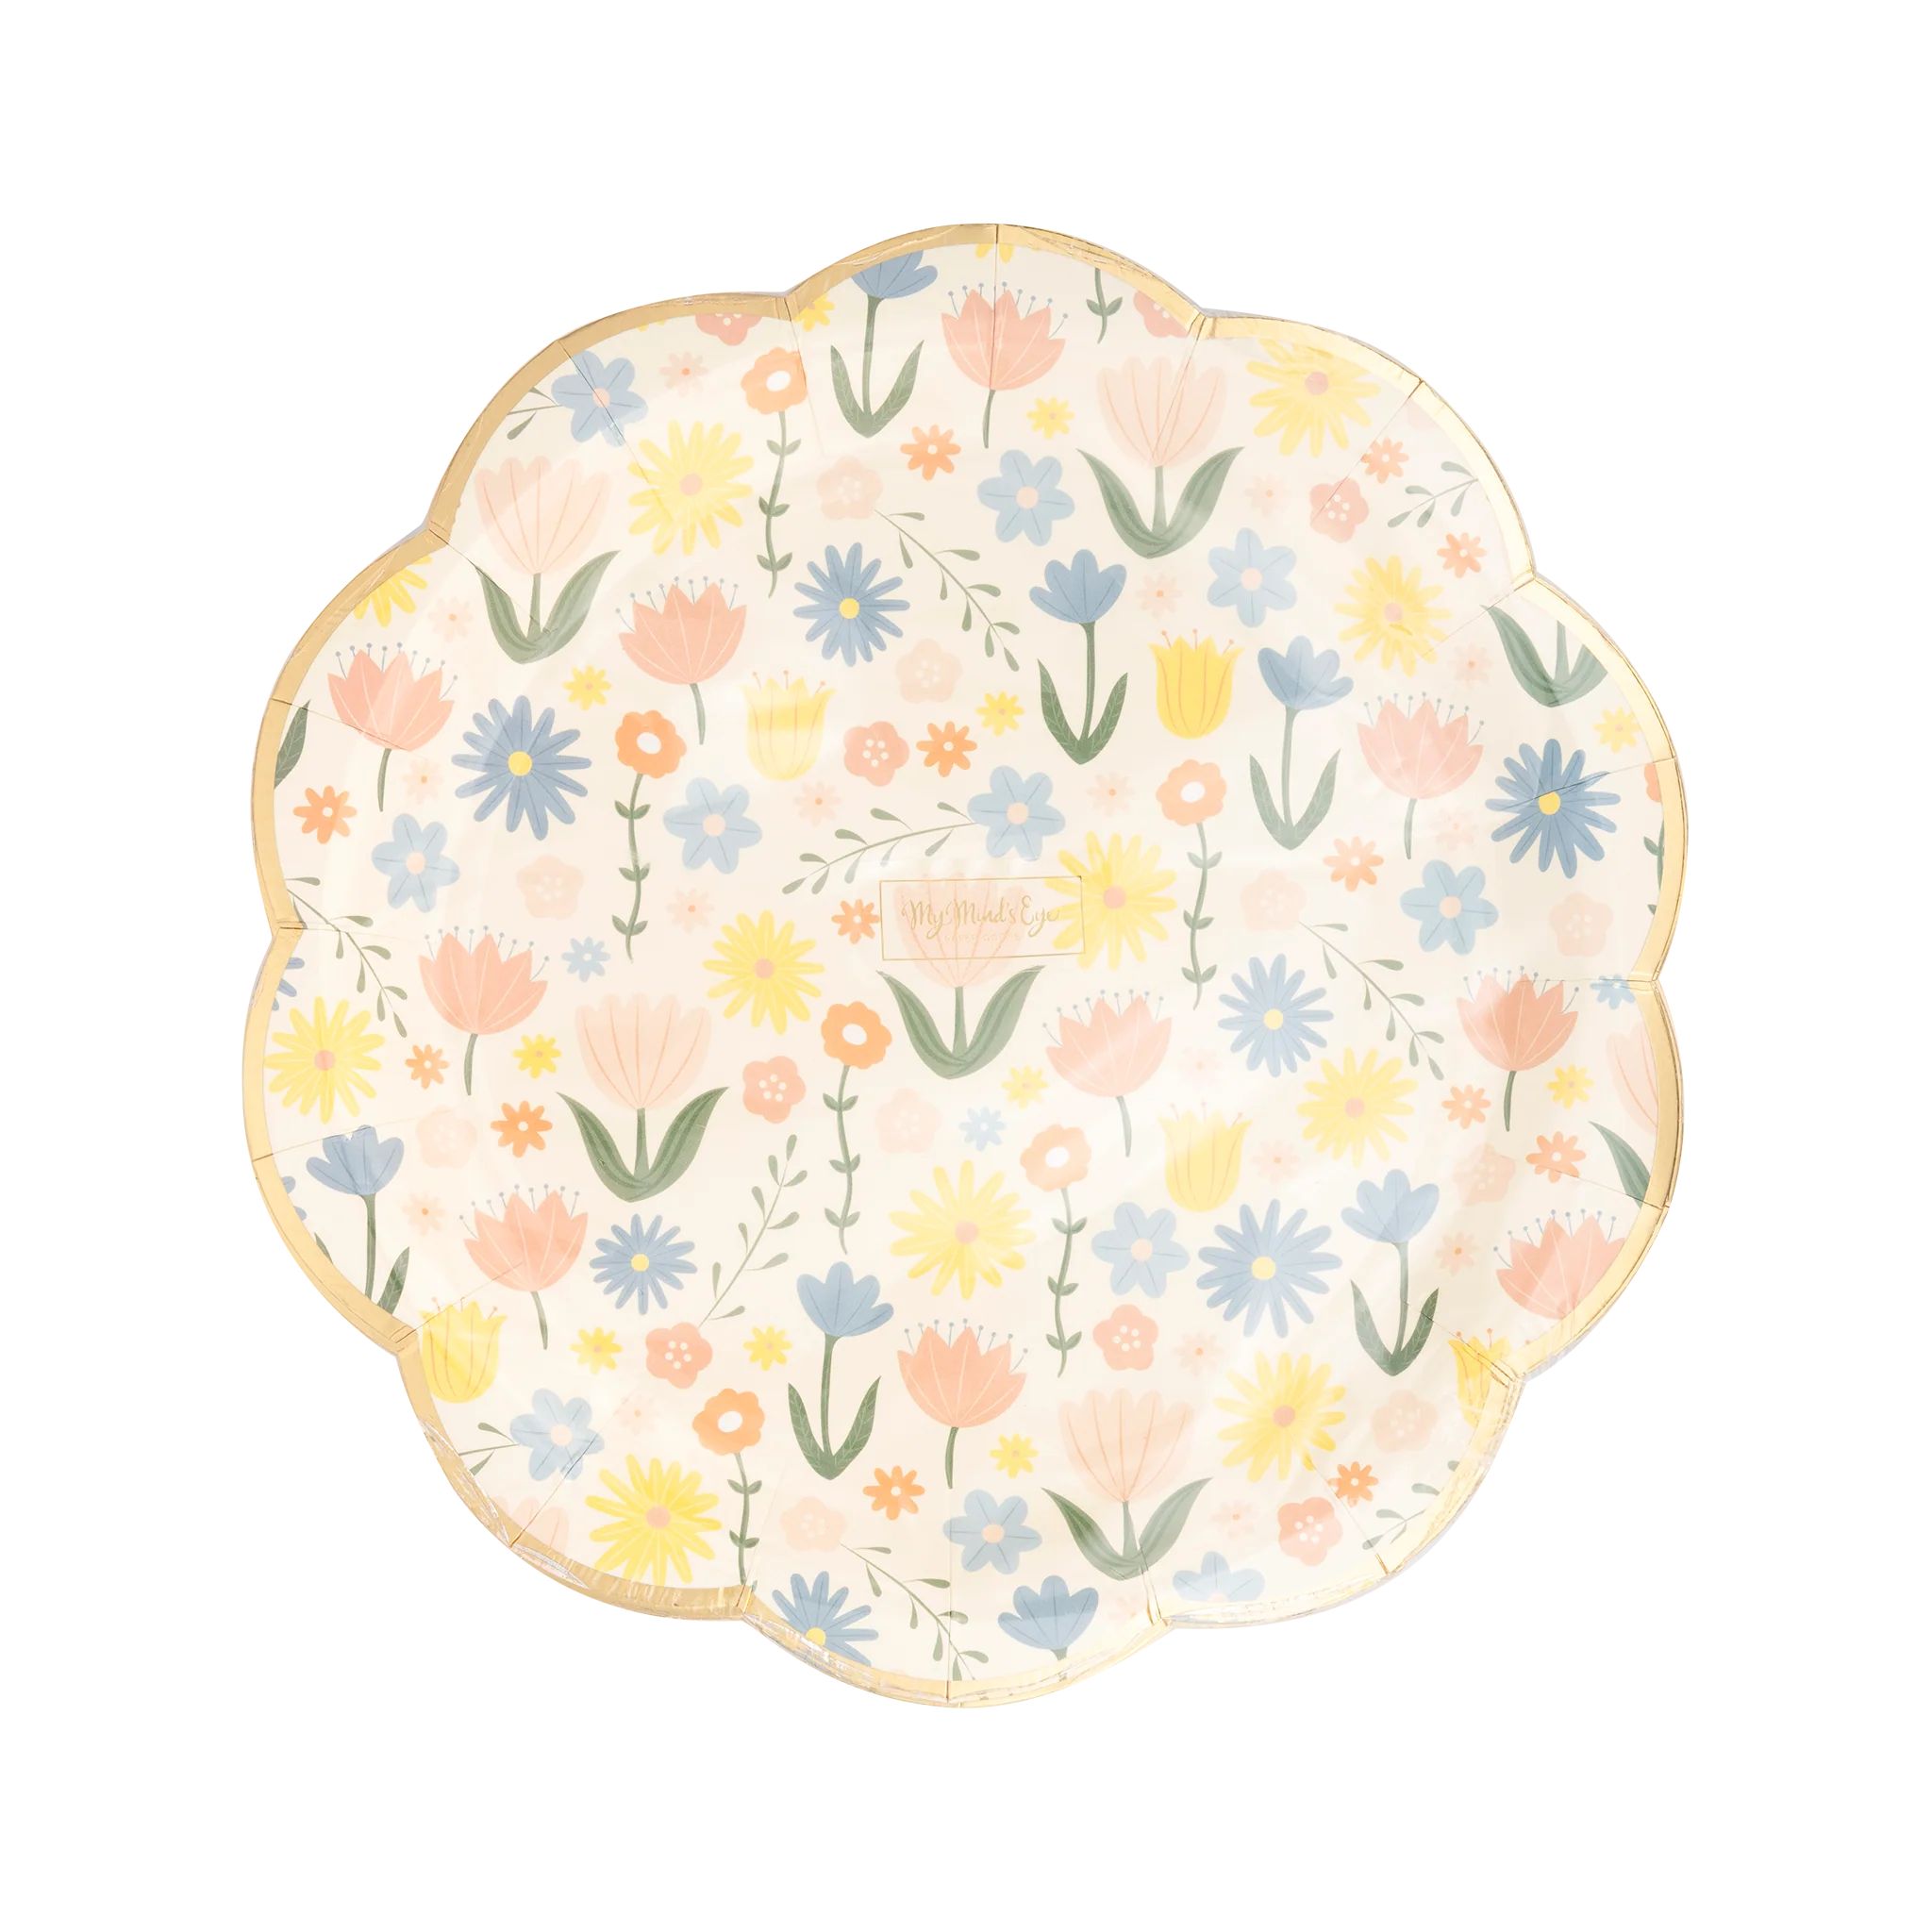 Floral Plate | My Mind's Eye